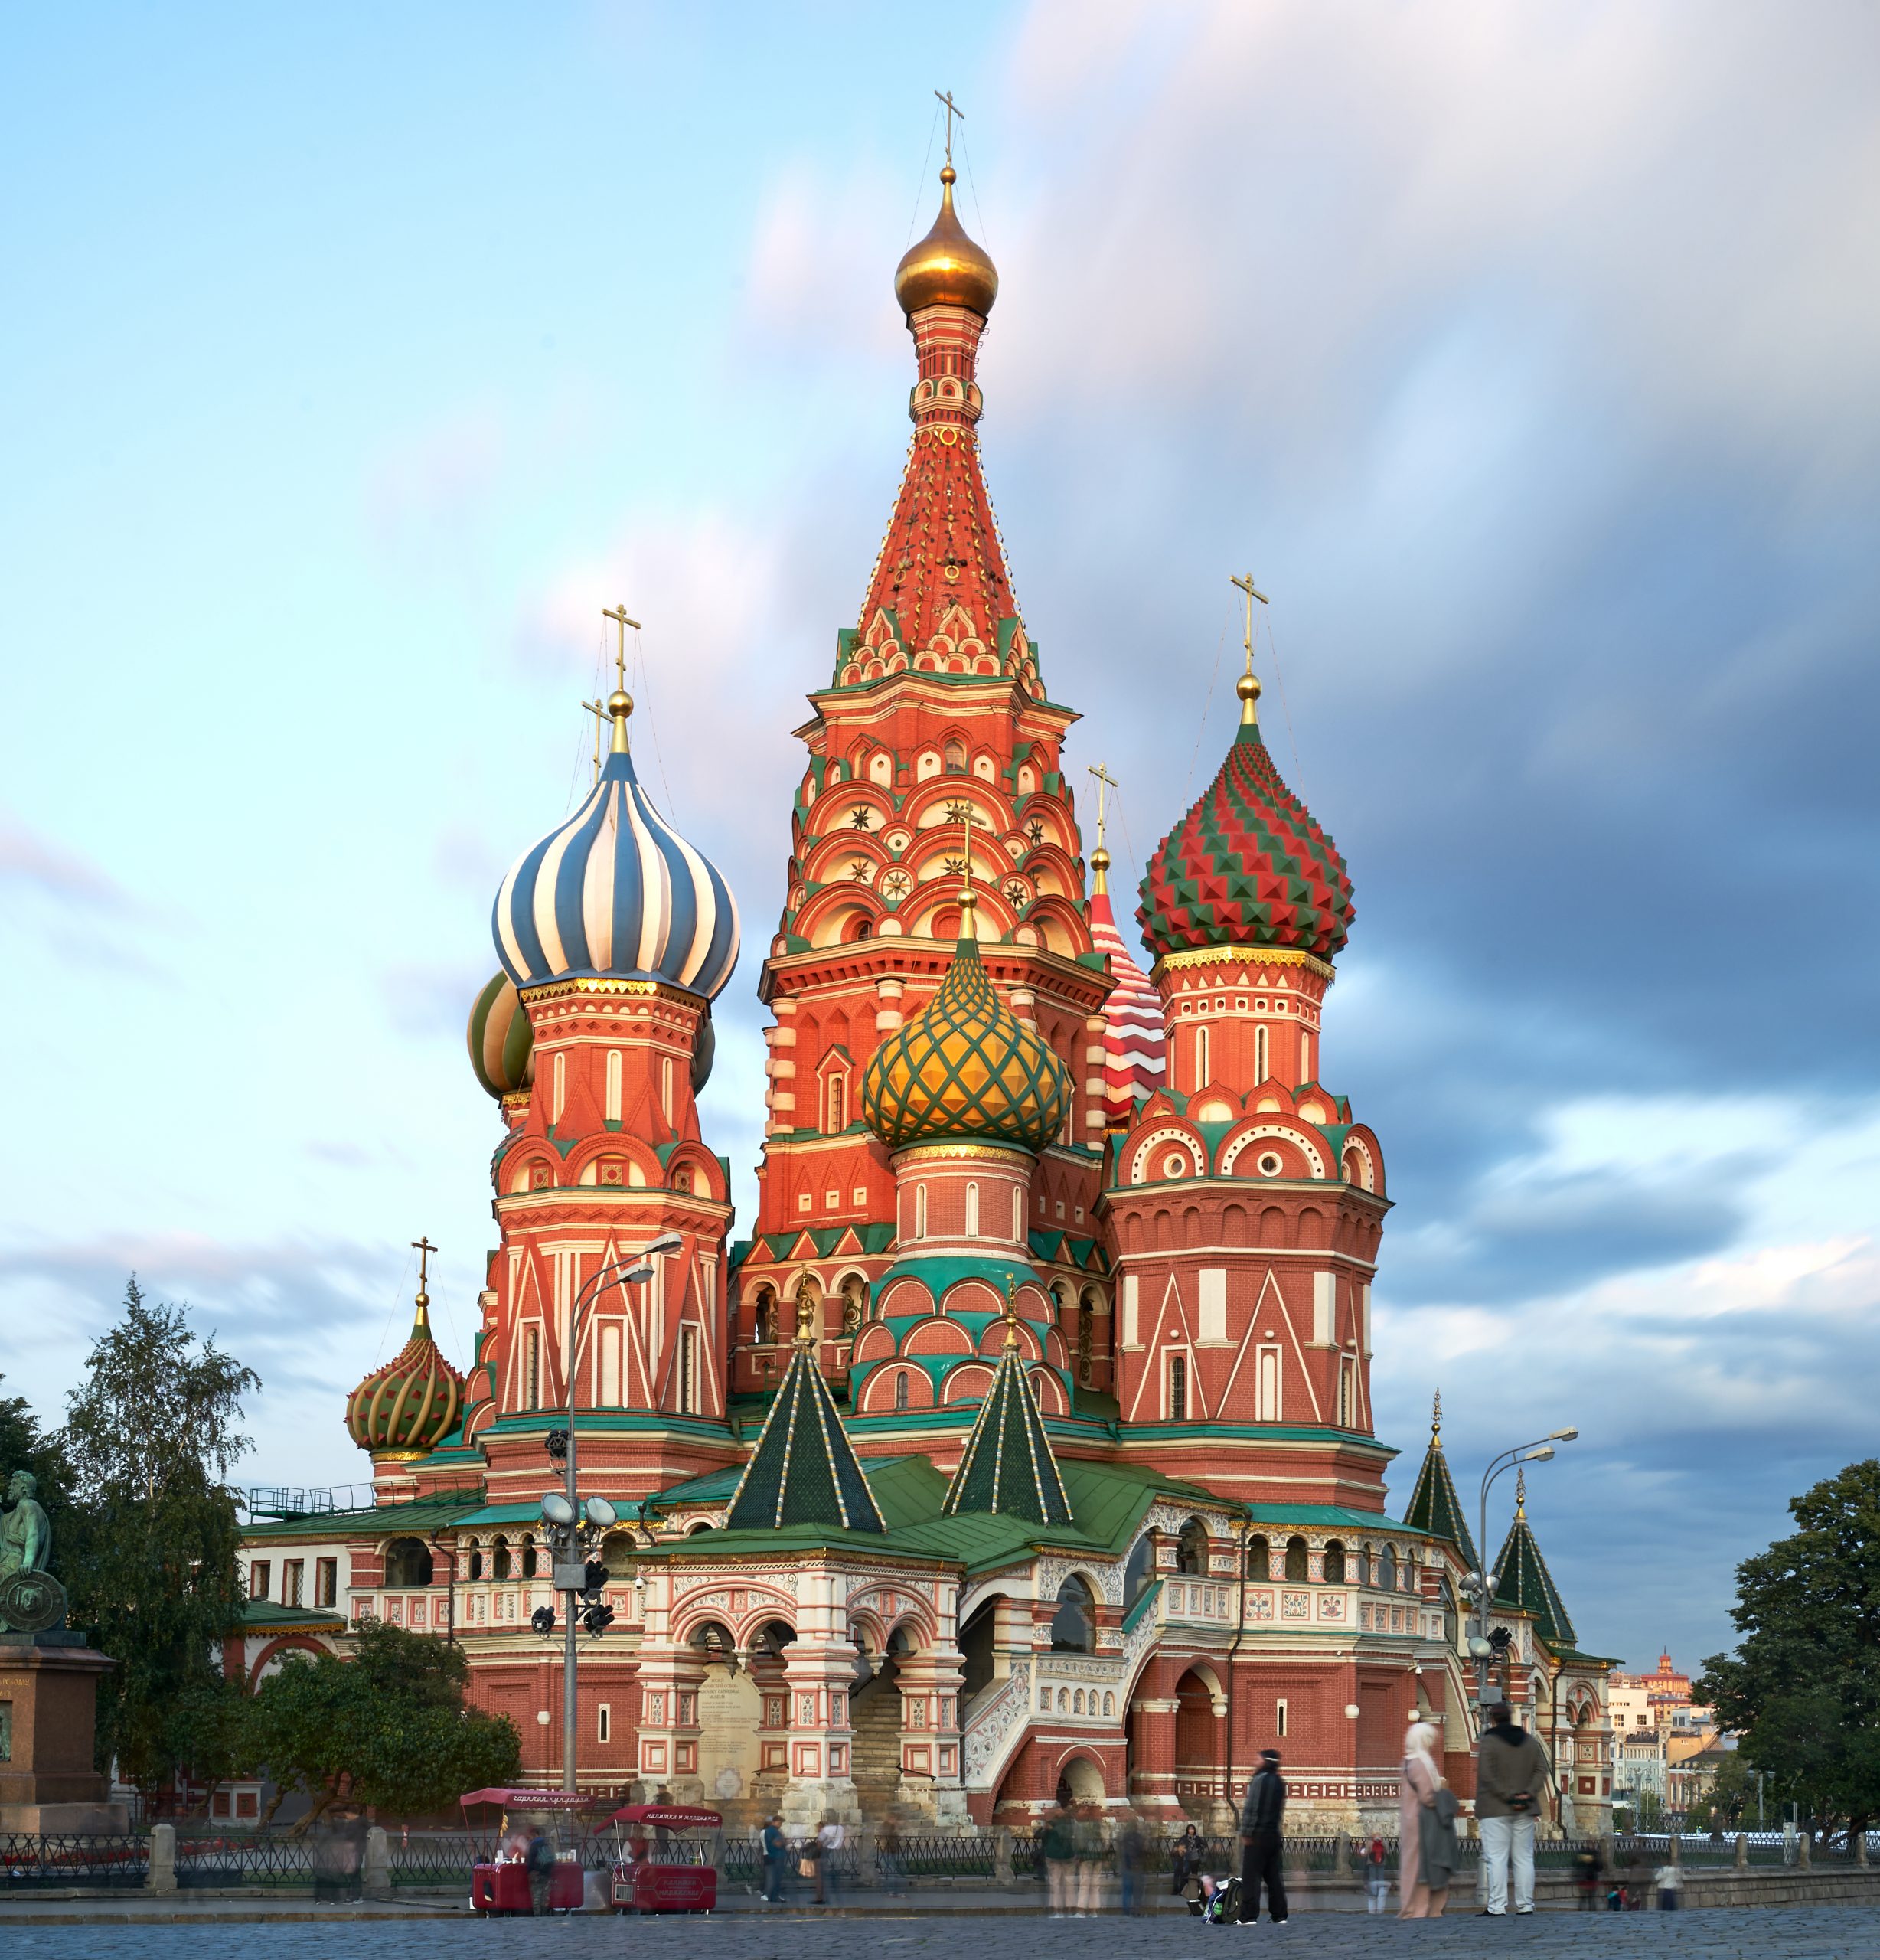 Image of St. Basil's Cathederal in Moscow